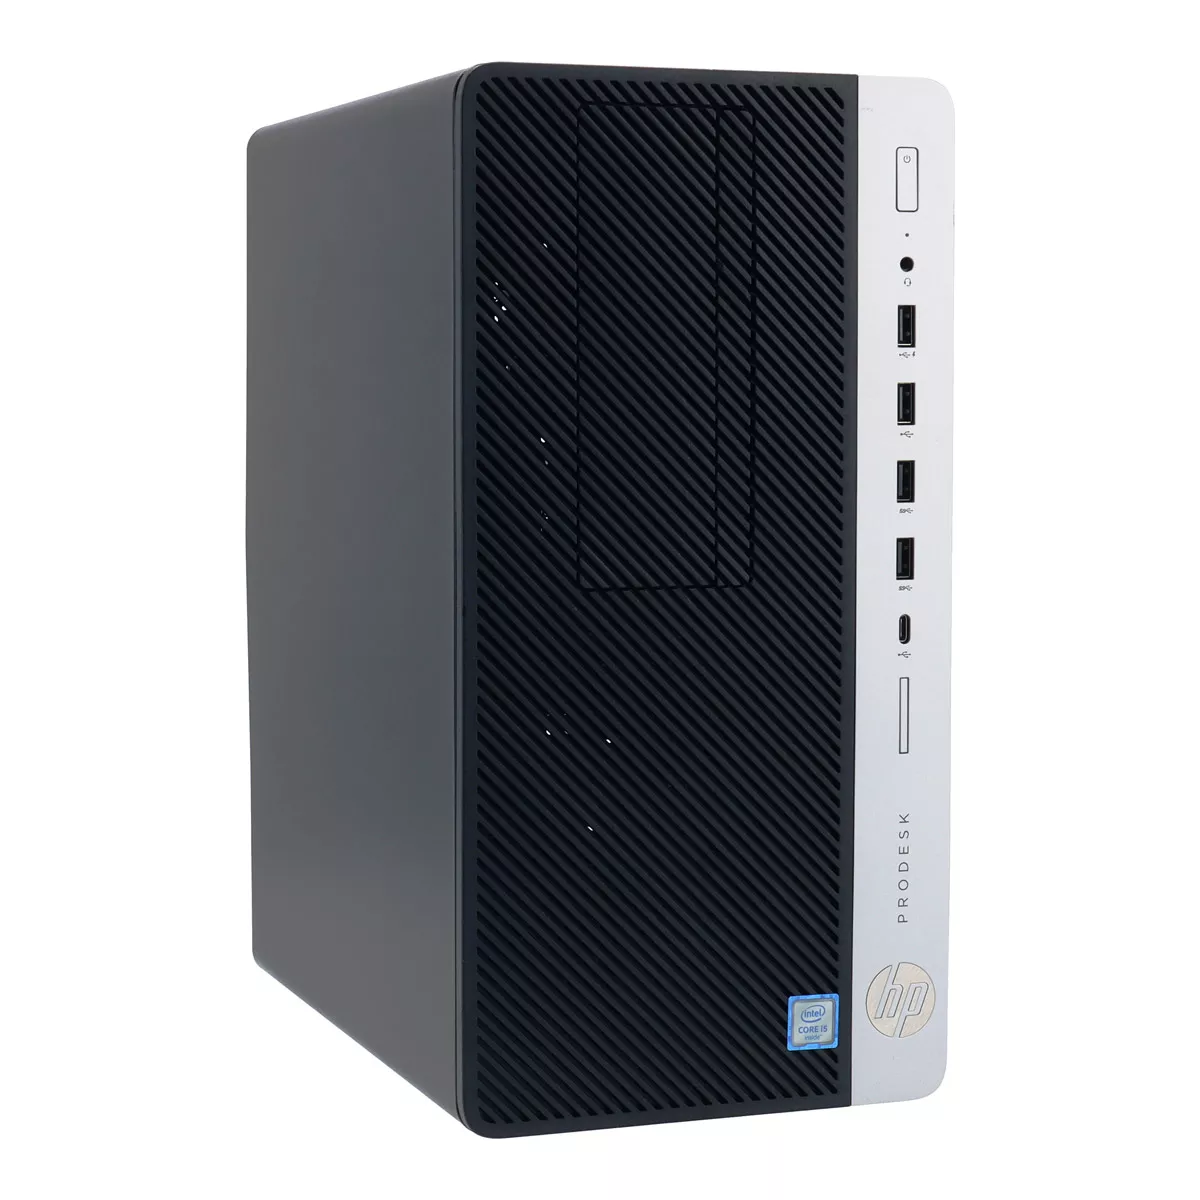 HP ProDesk 600 G3 Minitower Core i5 6500 3,2 GHz 8 GB 240 GB SSD A+